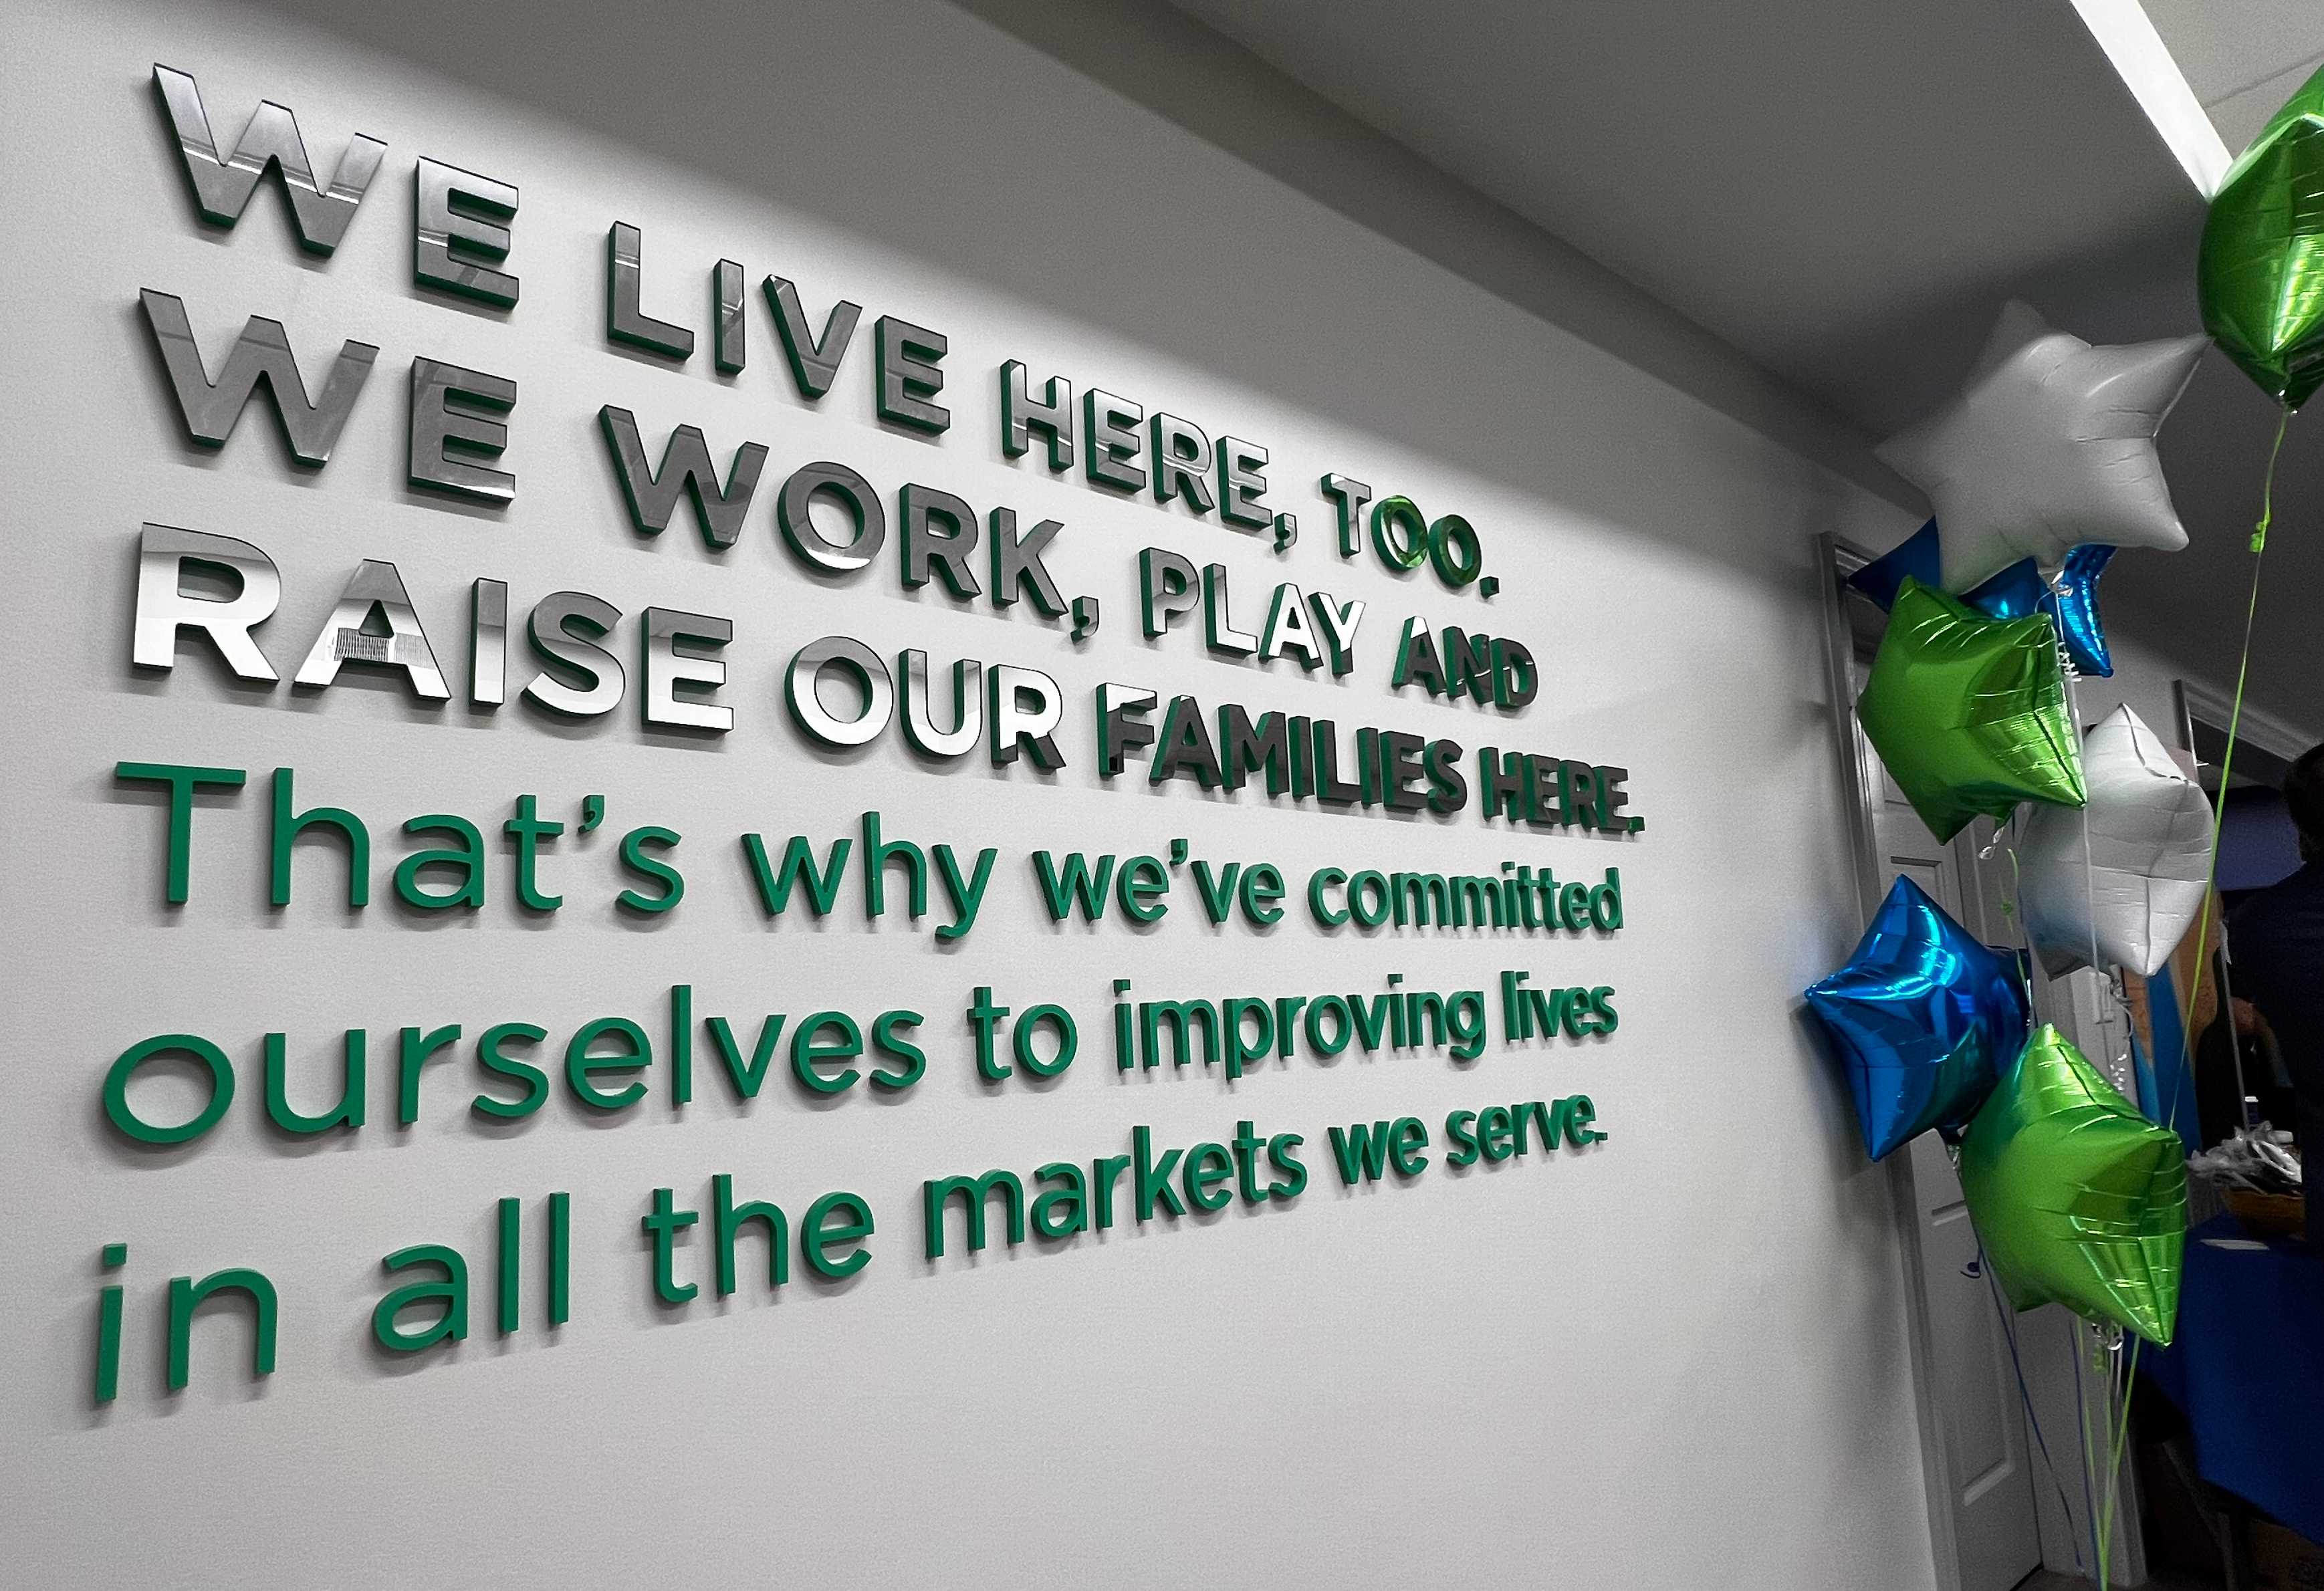 082422 Fifth Third ribbon cutting wall quote - Copy